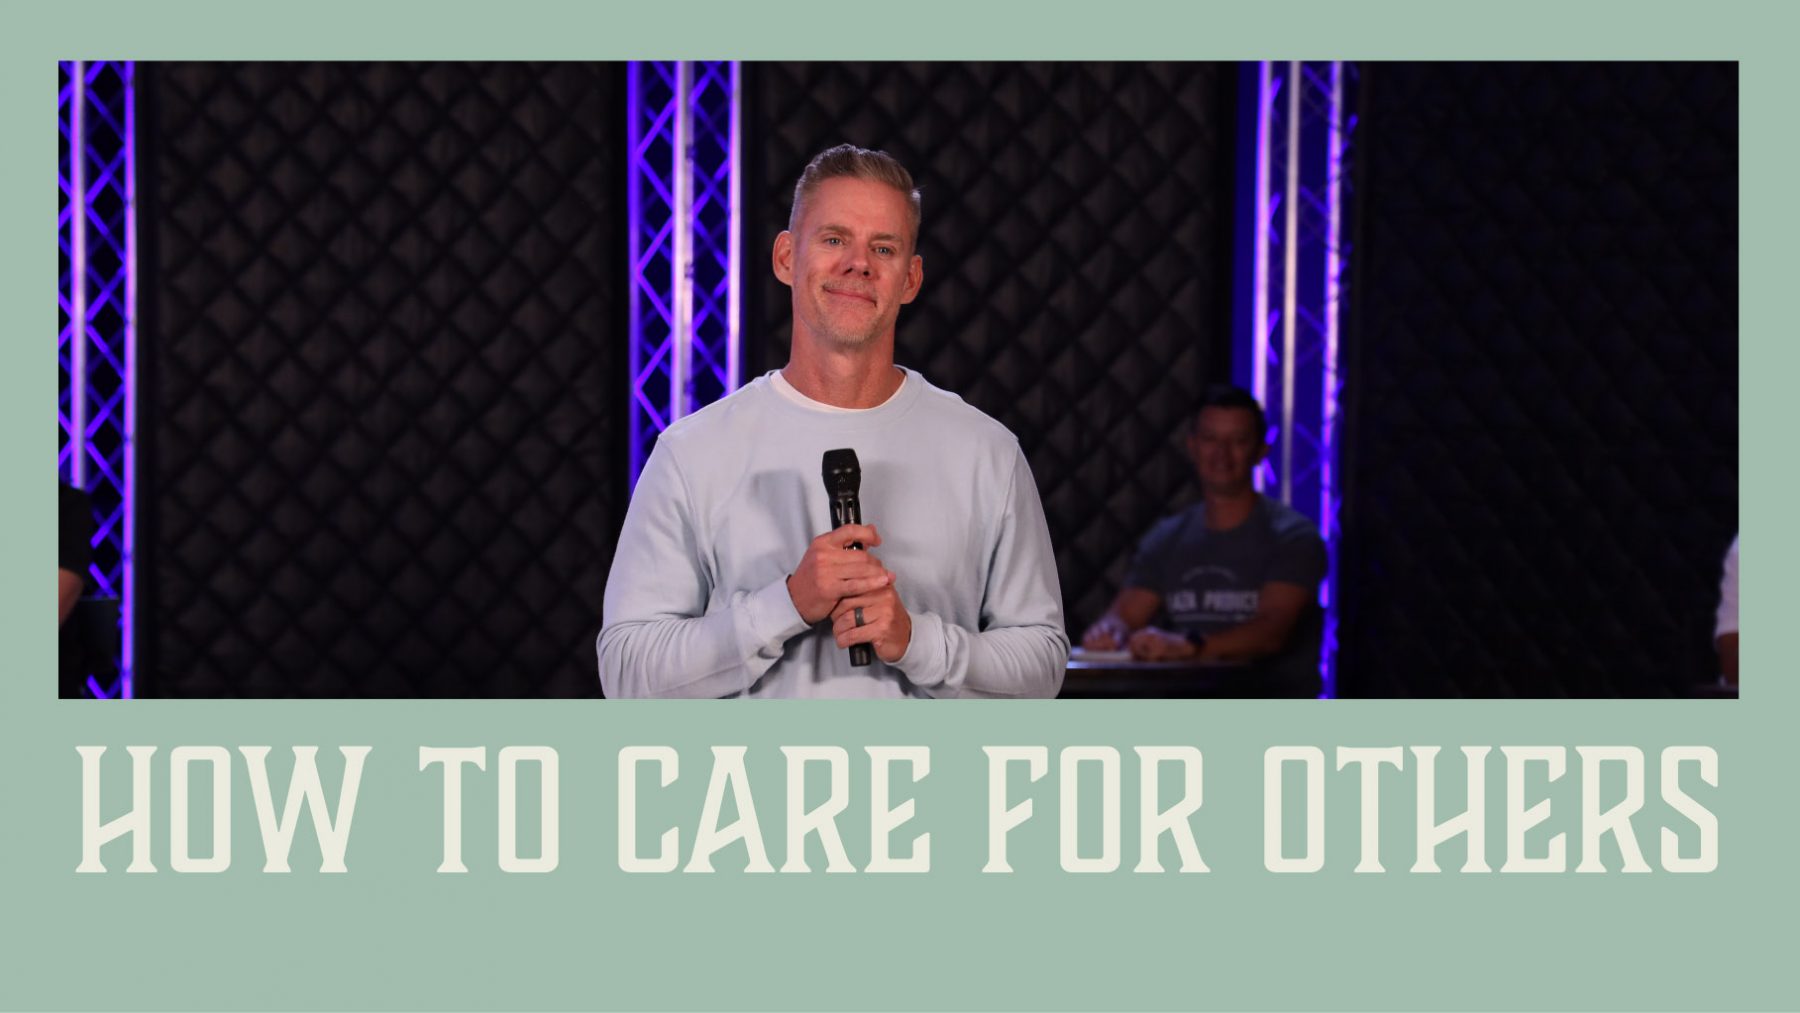 How to Care for Others